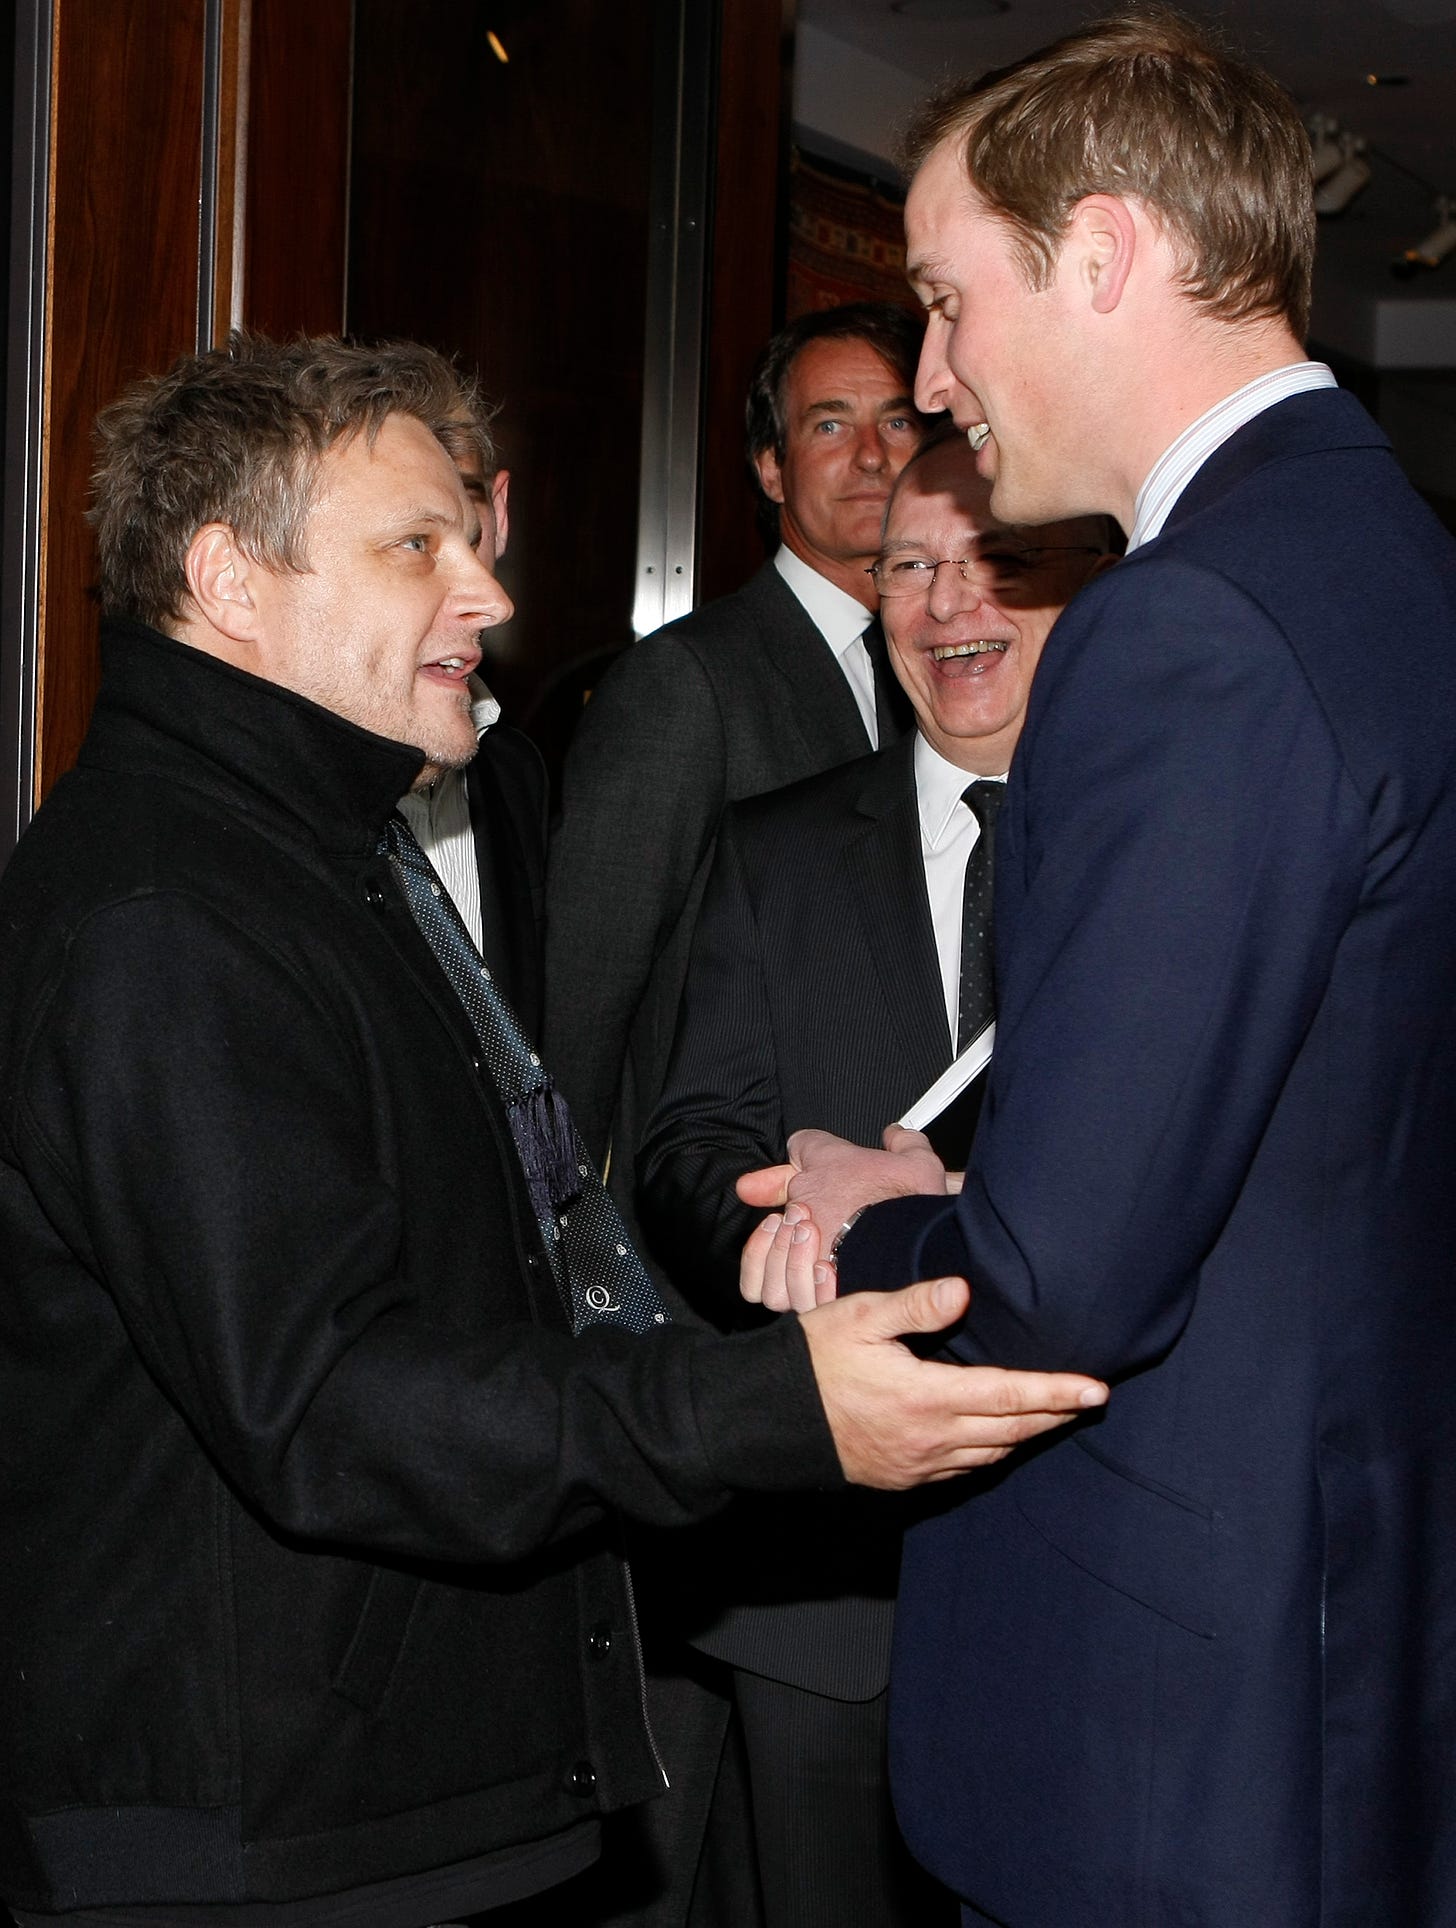 rankin shaking hands with prince william